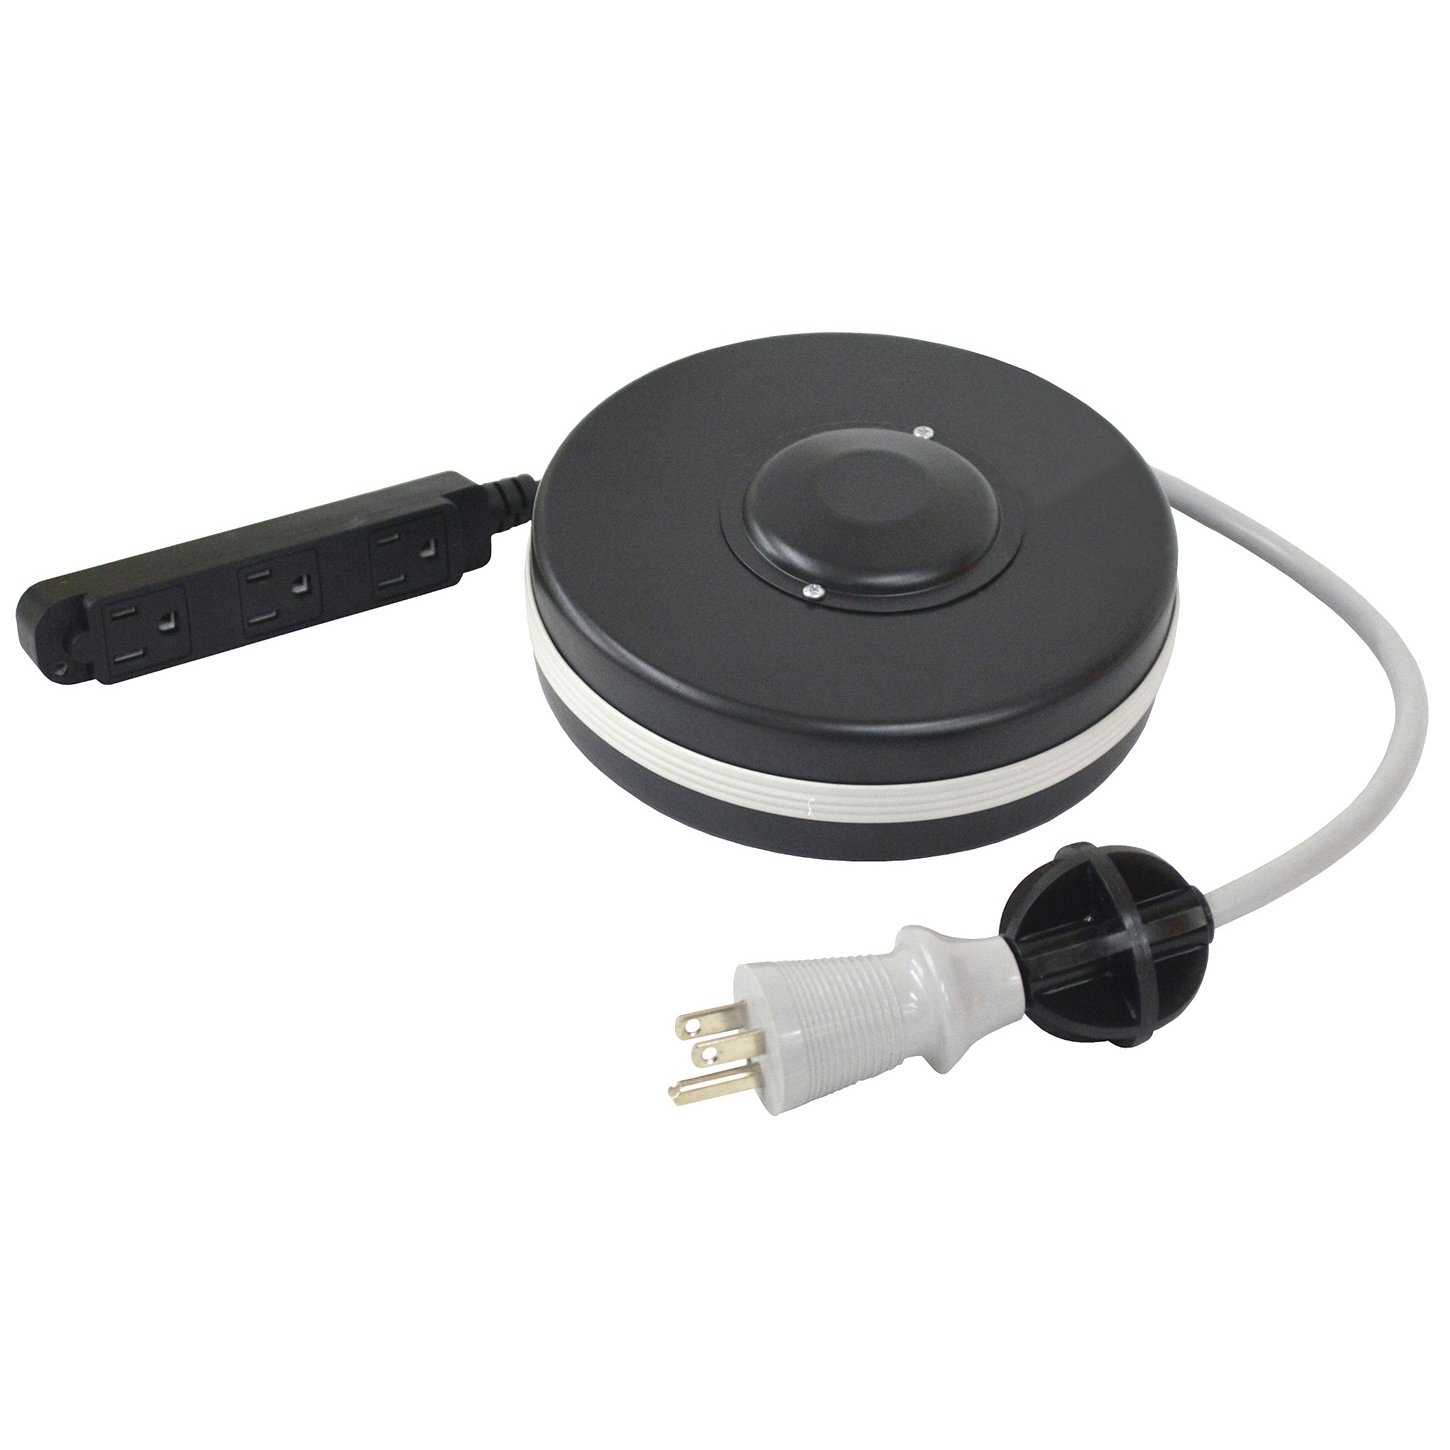 Optional 10' Hospital Grade Cord Reel with 3 Power Outlets for